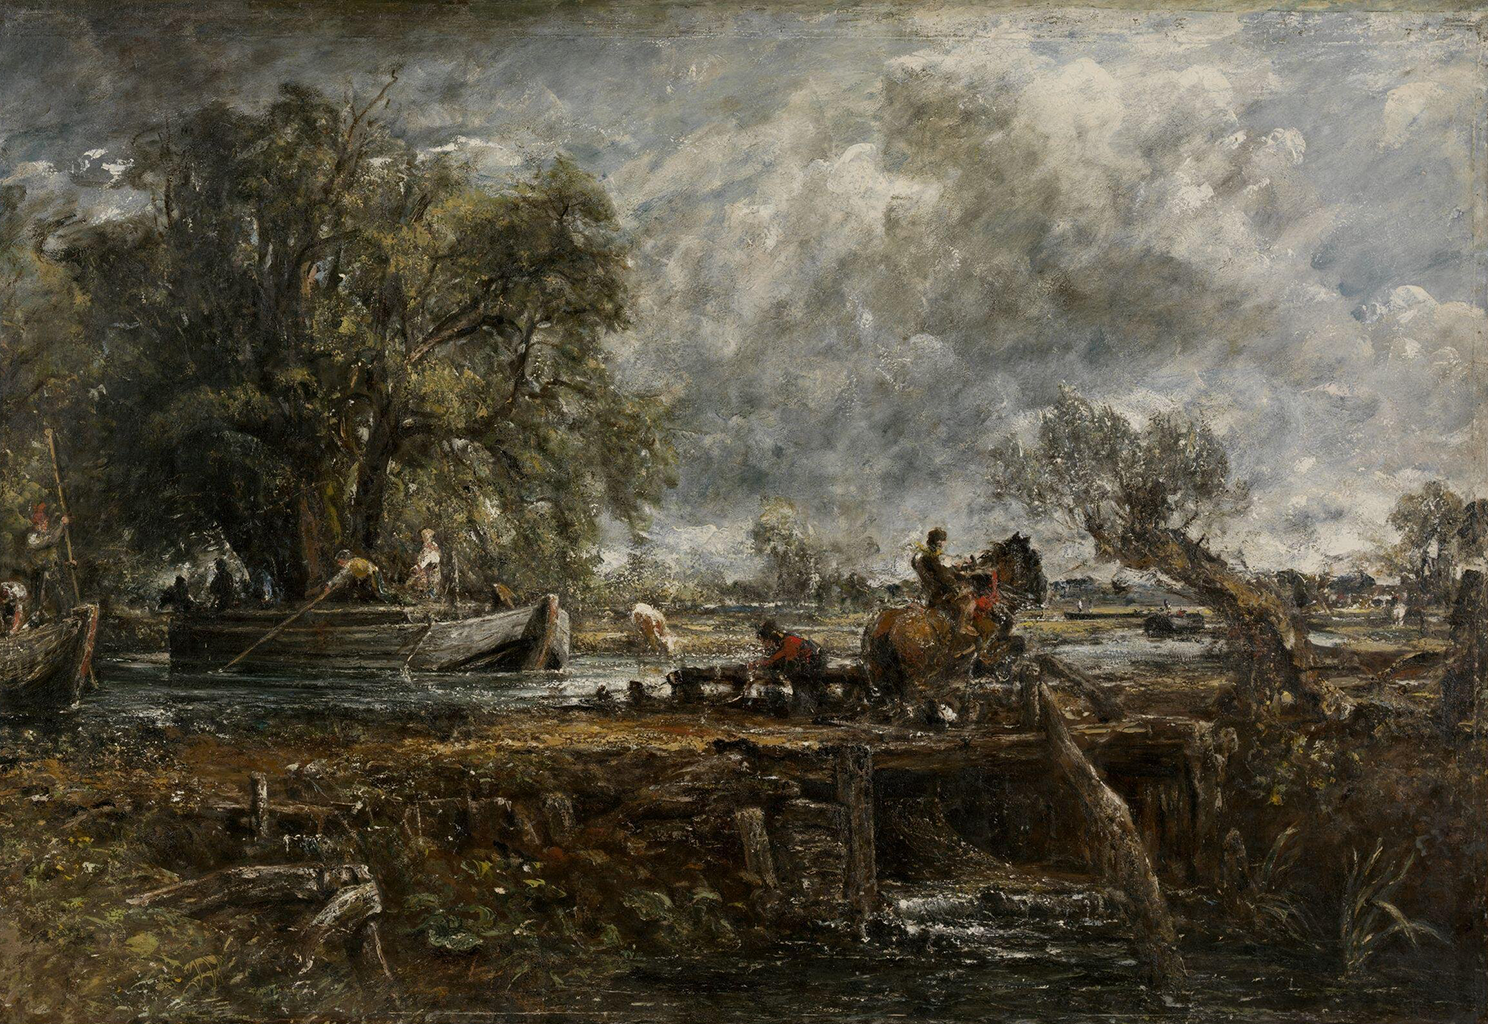 A painting depicting a group of men near a small stream of water in a forest area. On are two small groups of people that are rowing wooden boats through the stream. On the bank, a man is riding on a horse and crossing a small bridge. The sky is covered with large gray clouds.